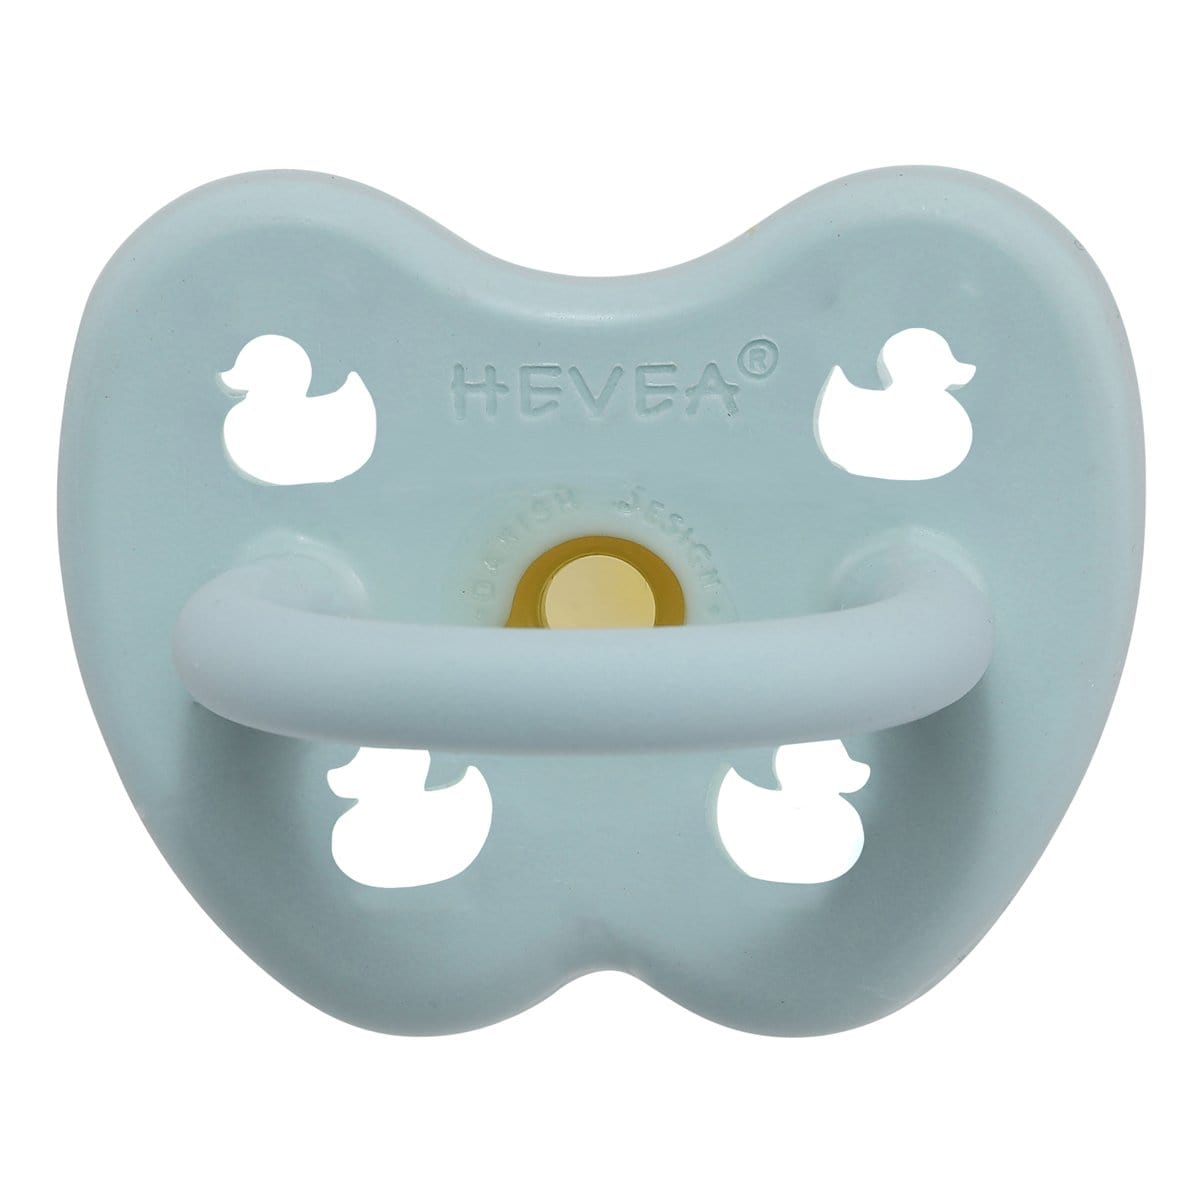 Hevea Pacifier Baby Blue Orthodontic Rubber Hevea Pacifiers & Teethers Lil Tulips